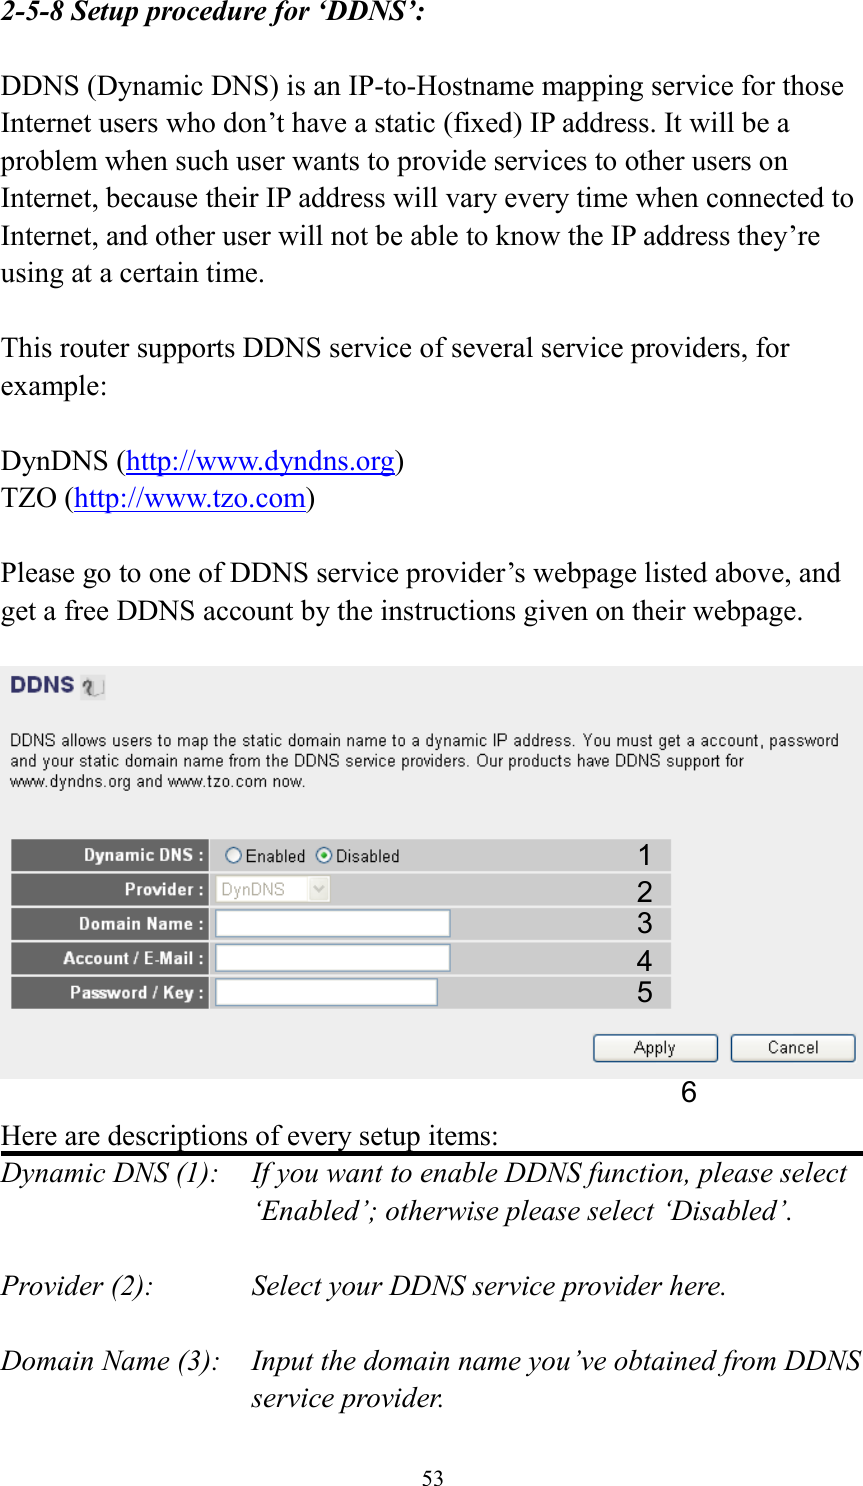 53 2-5-8 Setup procedure for ‘DDNS’:  DDNS (Dynamic DNS) is an IP-to-Hostname mapping service for those Internet users who don’t have a static (fixed) IP address. It will be a problem when such user wants to provide services to other users on Internet, because their IP address will vary every time when connected to Internet, and other user will not be able to know the IP address they’re using at a certain time.  This router supports DDNS service of several service providers, for example:  DynDNS (http://www.dyndns.org) TZO (http://www.tzo.com)  Please go to one of DDNS service provider’s webpage listed above, and get a free DDNS account by the instructions given on their webpage.    Here are descriptions of every setup items: Dynamic DNS (1):    If you want to enable DDNS function, please select ‘Enabled’; otherwise please select ‘Disabled’.  Provider (2):      Select your DDNS service provider here.  Domain Name (3):    Input the domain name you’ve obtained from DDNS service provider. 1 2 3 4 5 6 